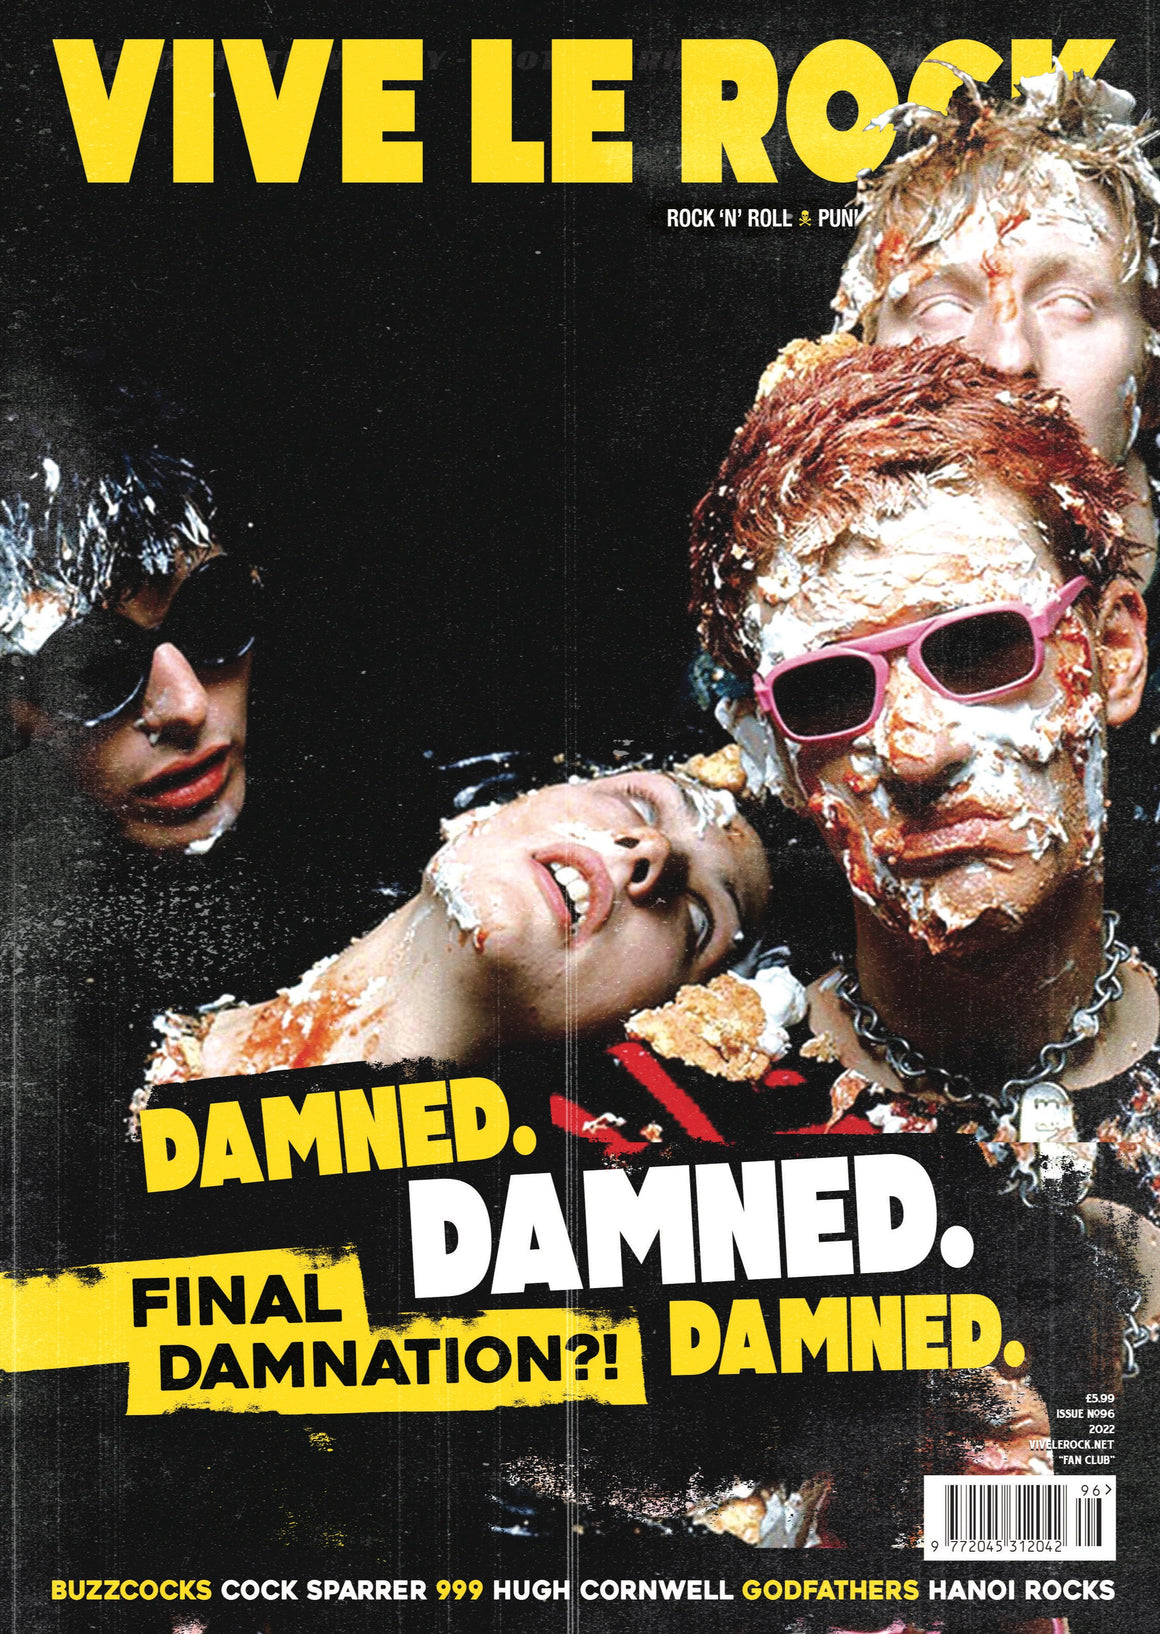 Vive Le Rock Magazine #96 THE DAMNED - Final Damnation?